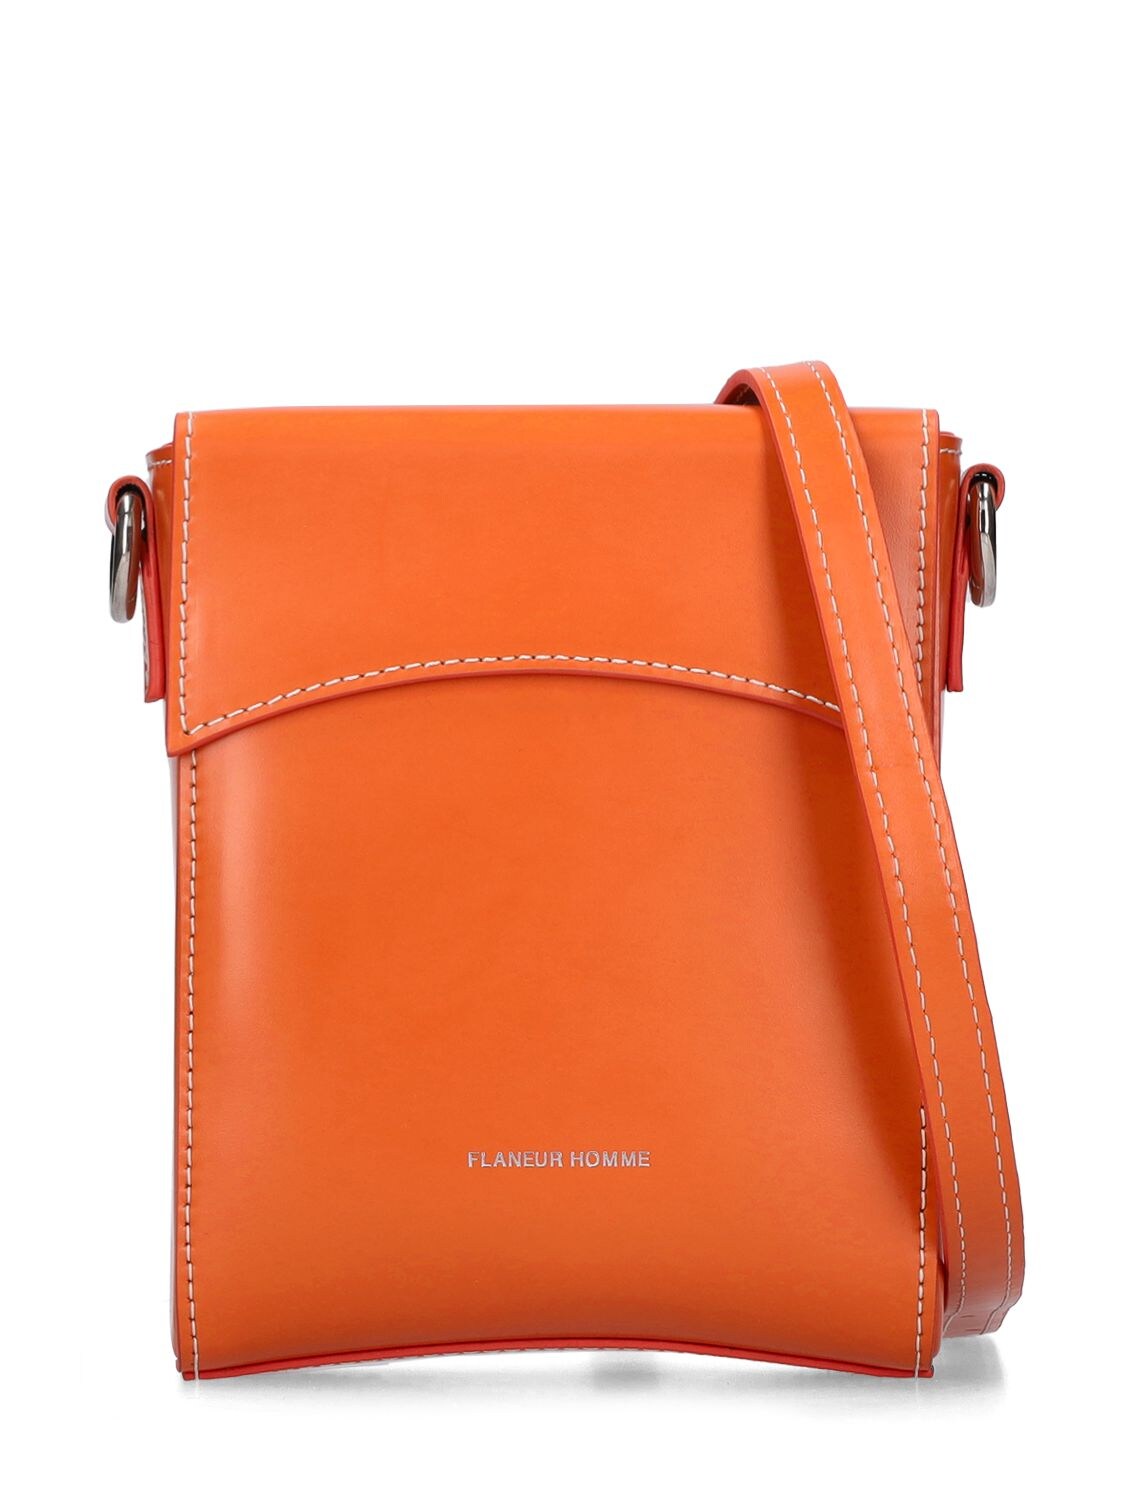 Flaneur Homme Leather Pouch W/ Logo In Orange